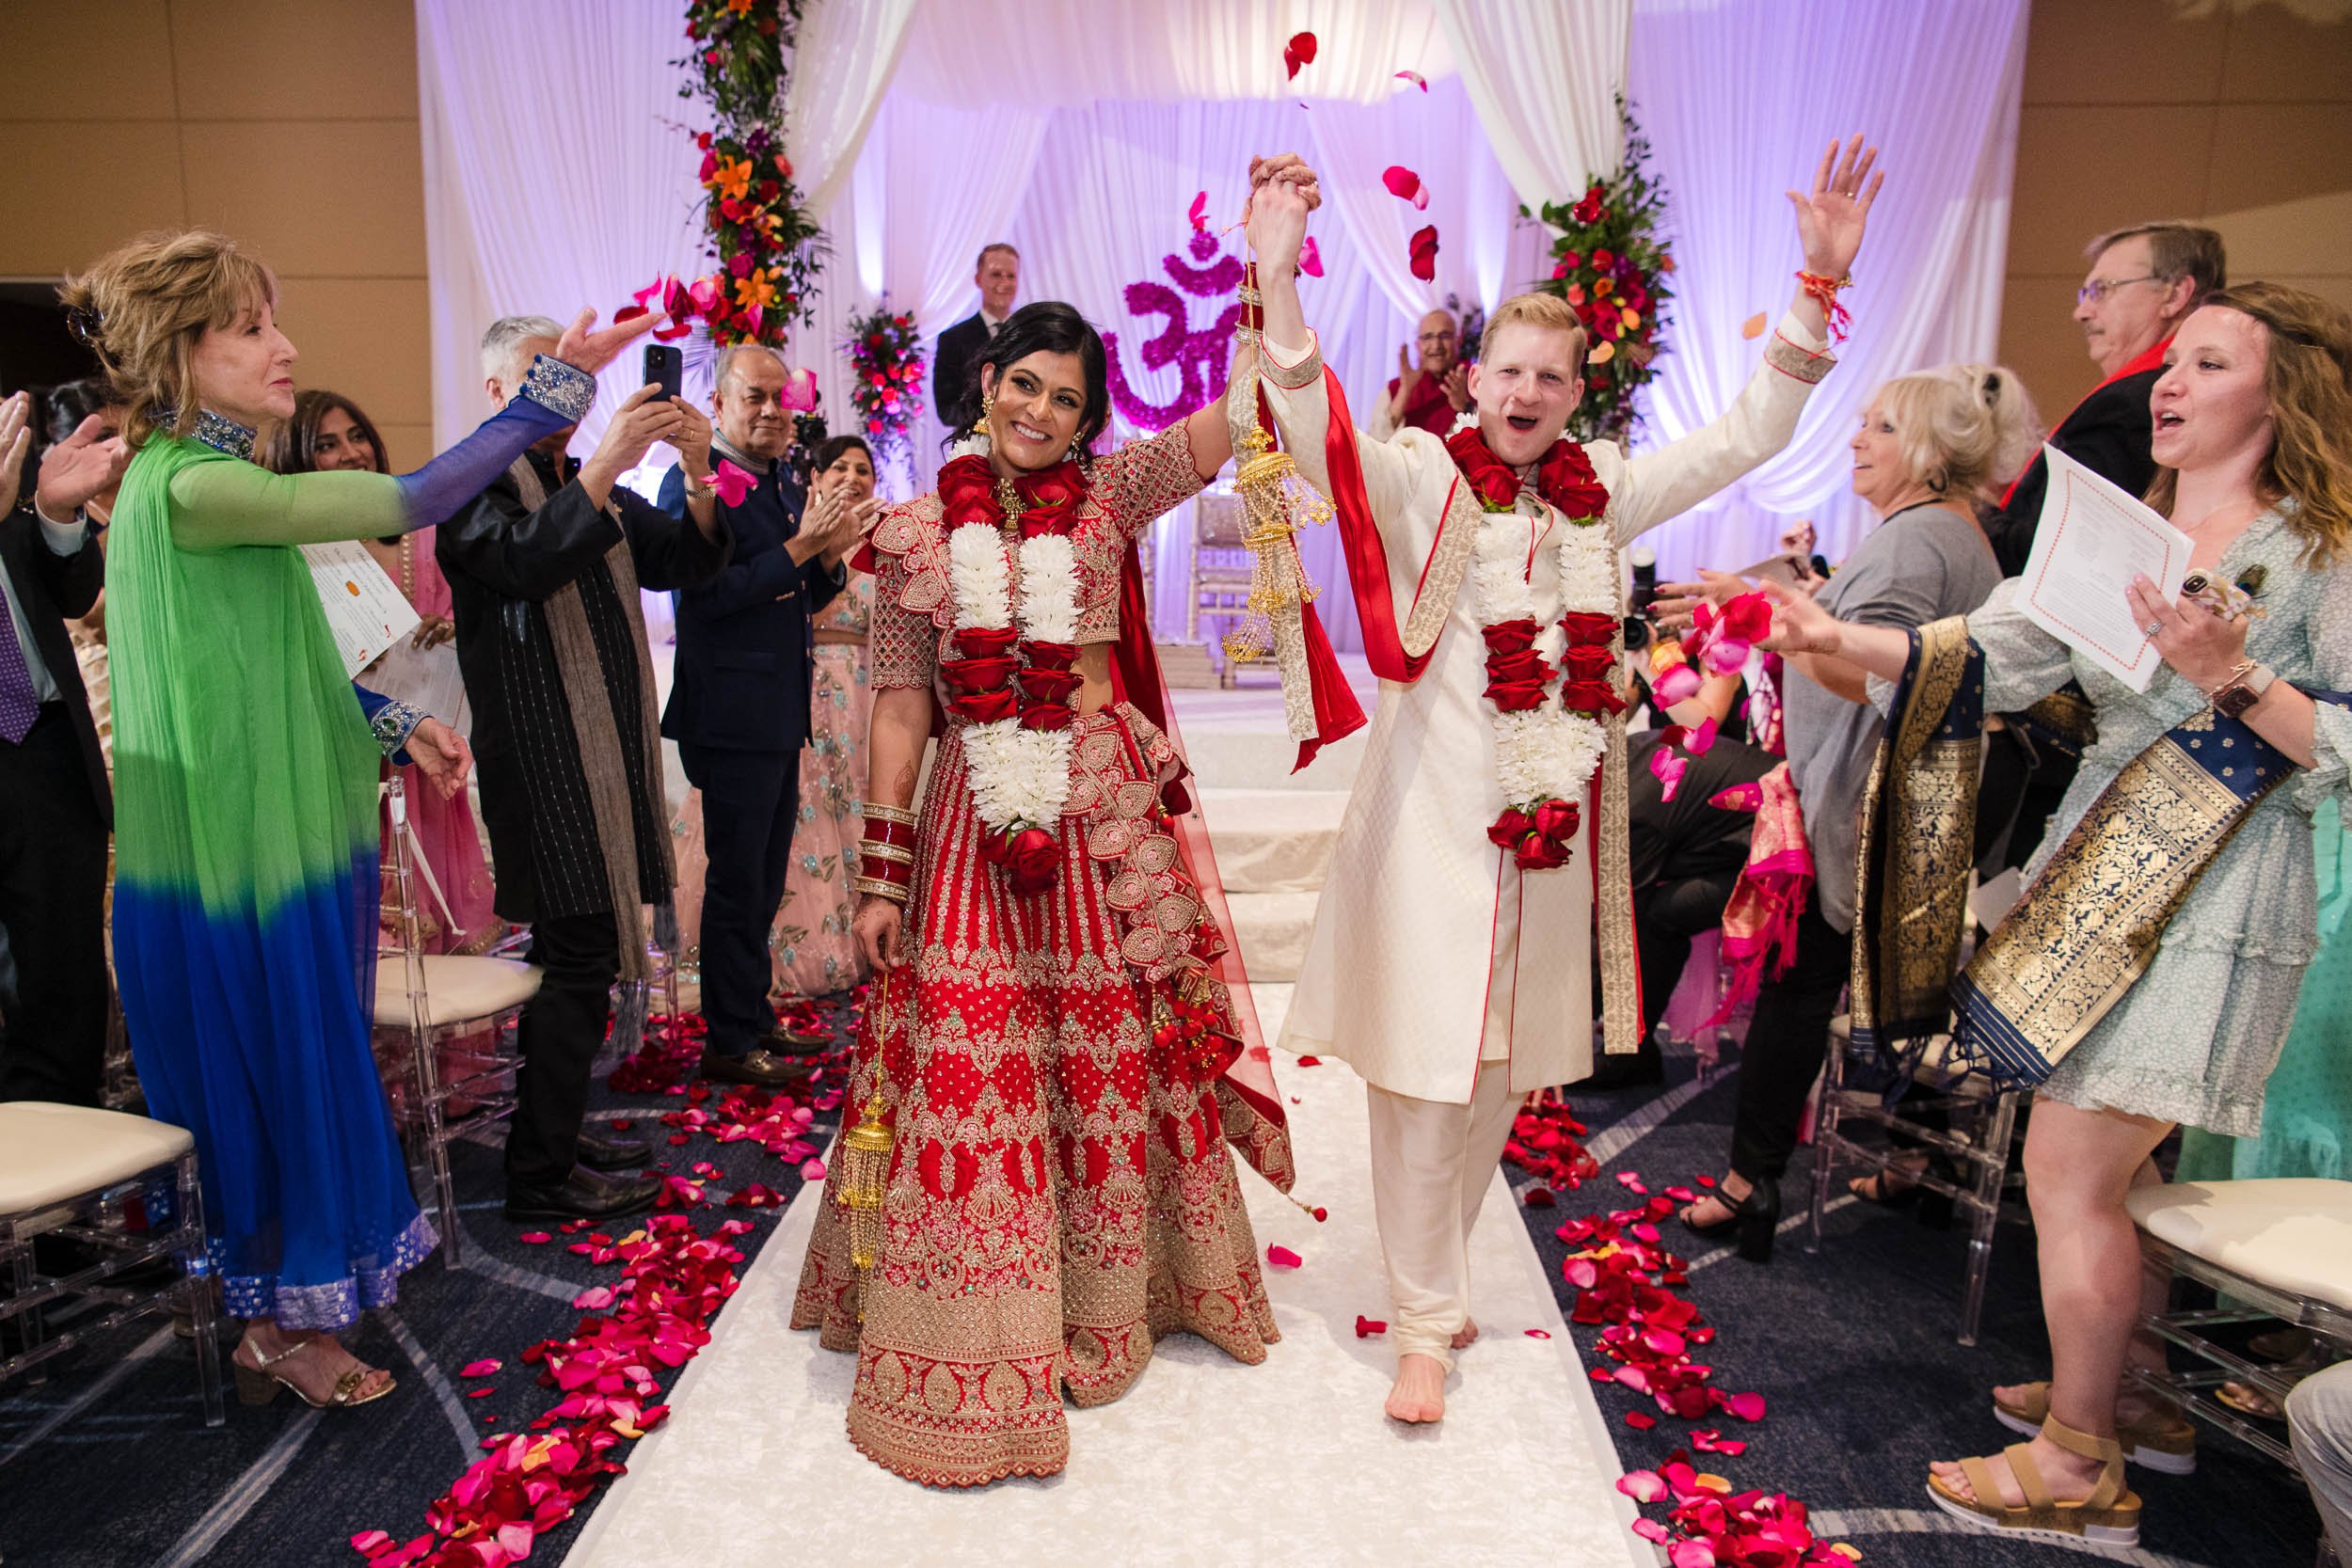 Indian Wedding Photographers | Renaissance Schaumburg | J. Brown Photography | bride and groom walk down the aisle during Indian wedding ceremony.